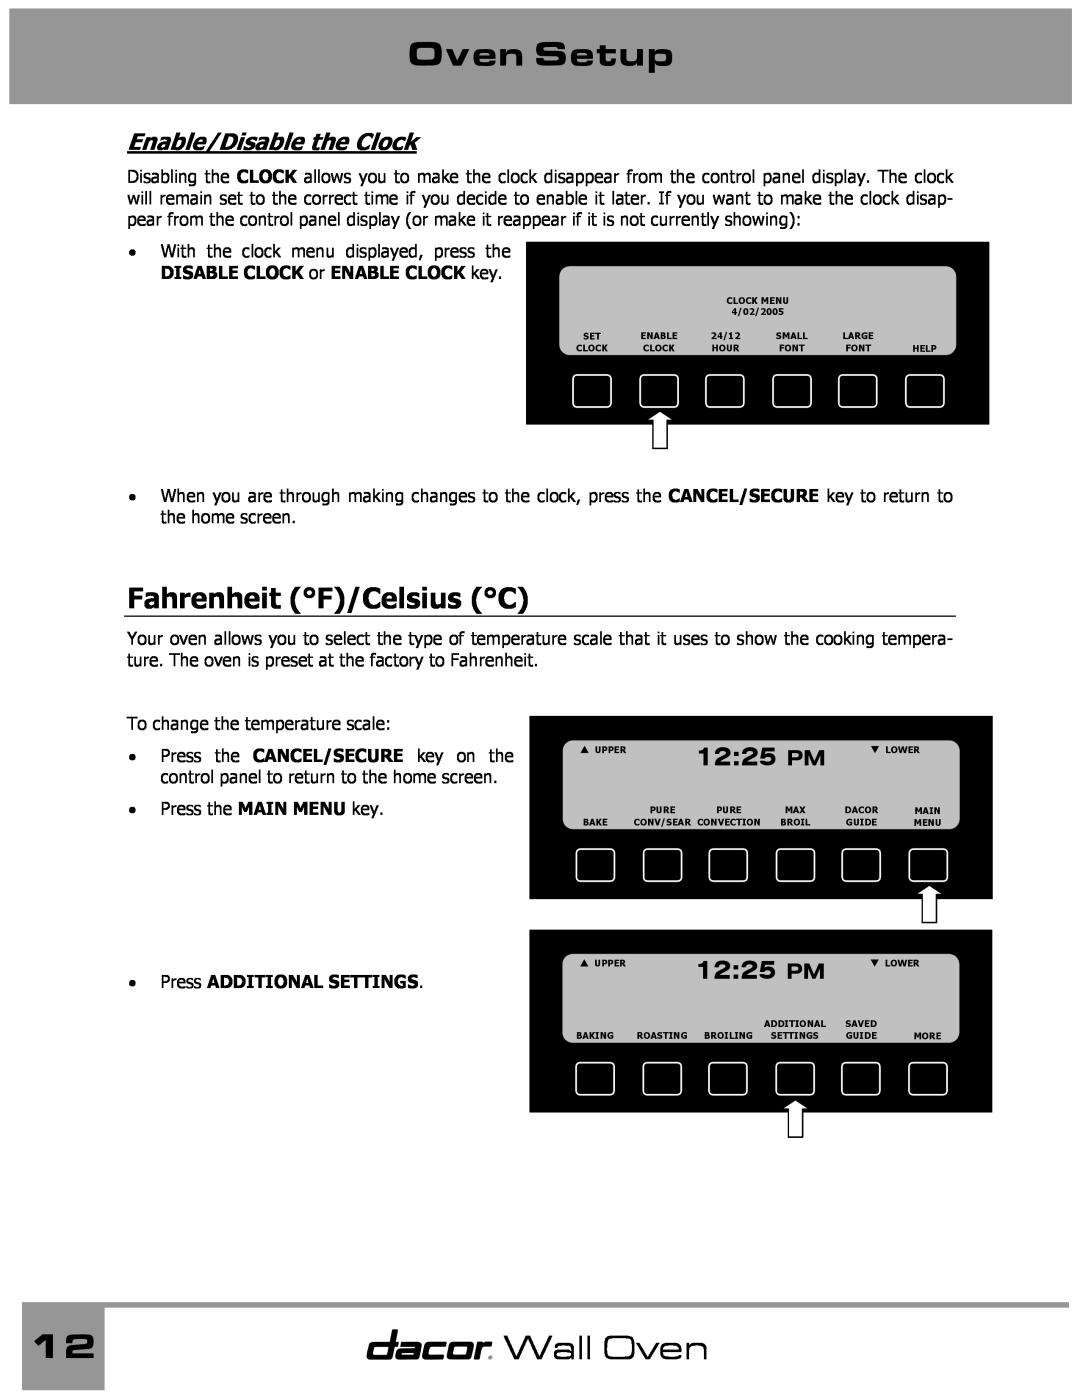 Dacor Wall Oven manual Fahrenheit F/Celsius C, Enable/Disable the Clock, Oven Setup, 1225 PM, Press ADDITIONAL SETTINGS 